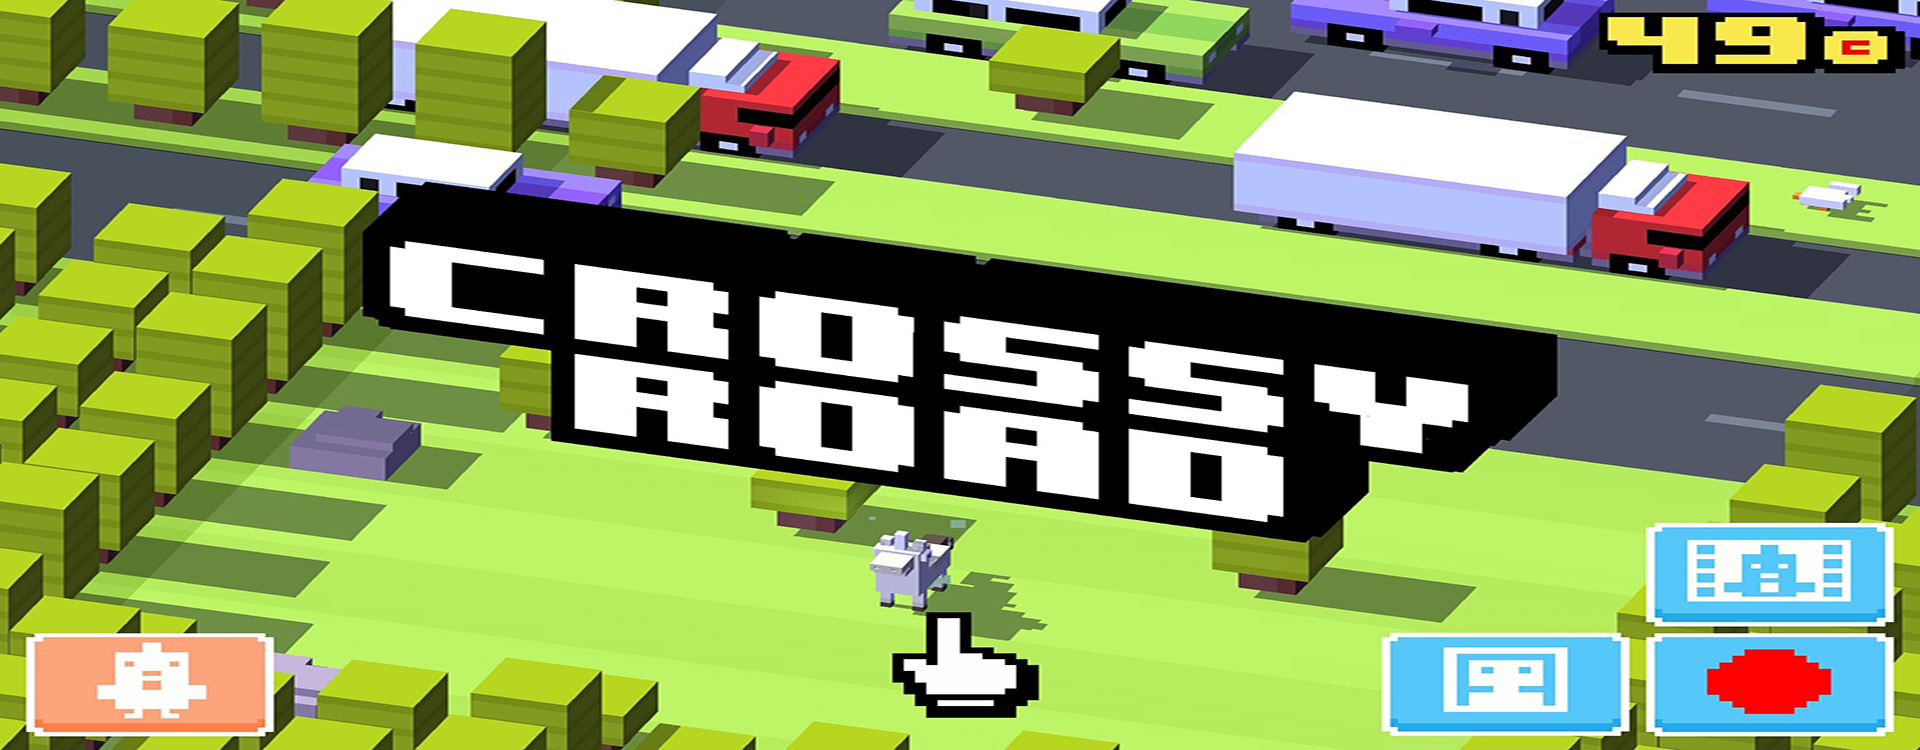 unity character selection crossy road